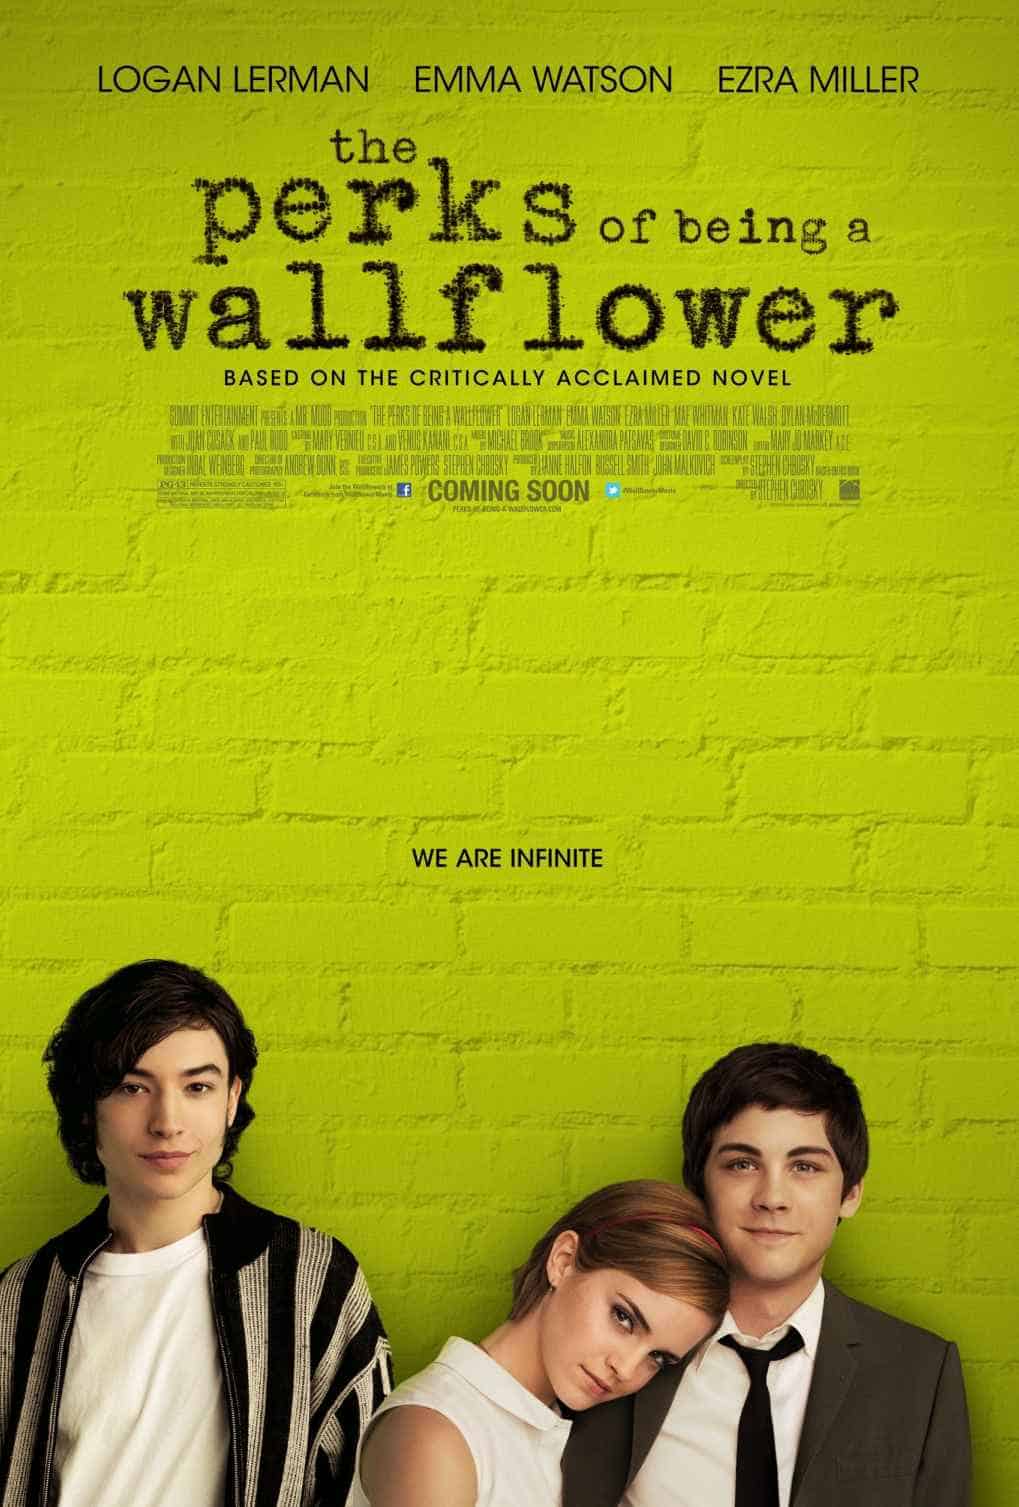 movie like 500 Days Of Summer The Perks of being a Wallflower (2012)